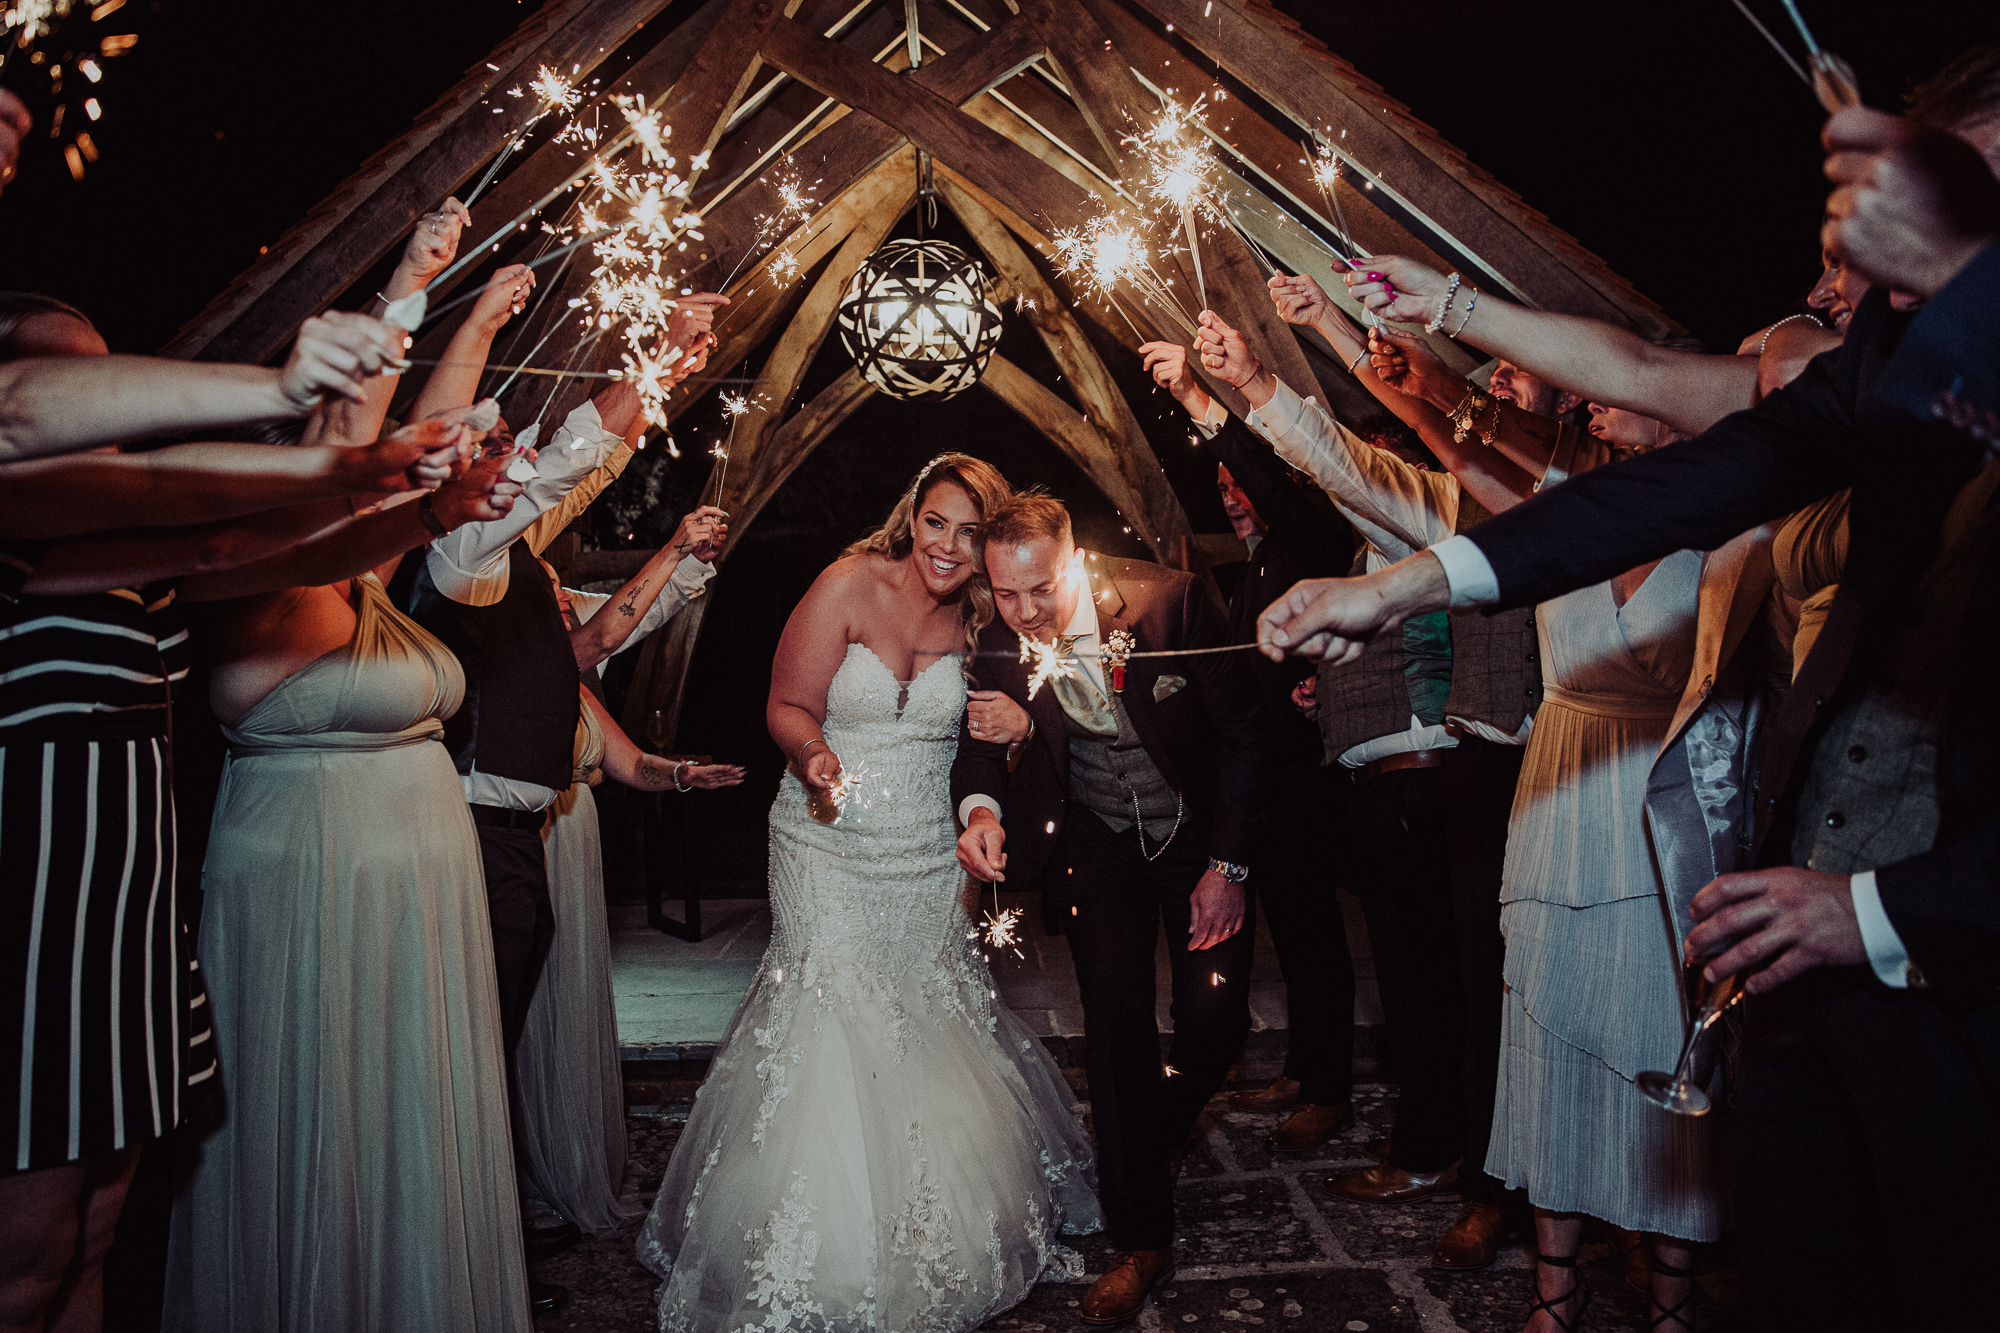 Bride & groom with sparklers